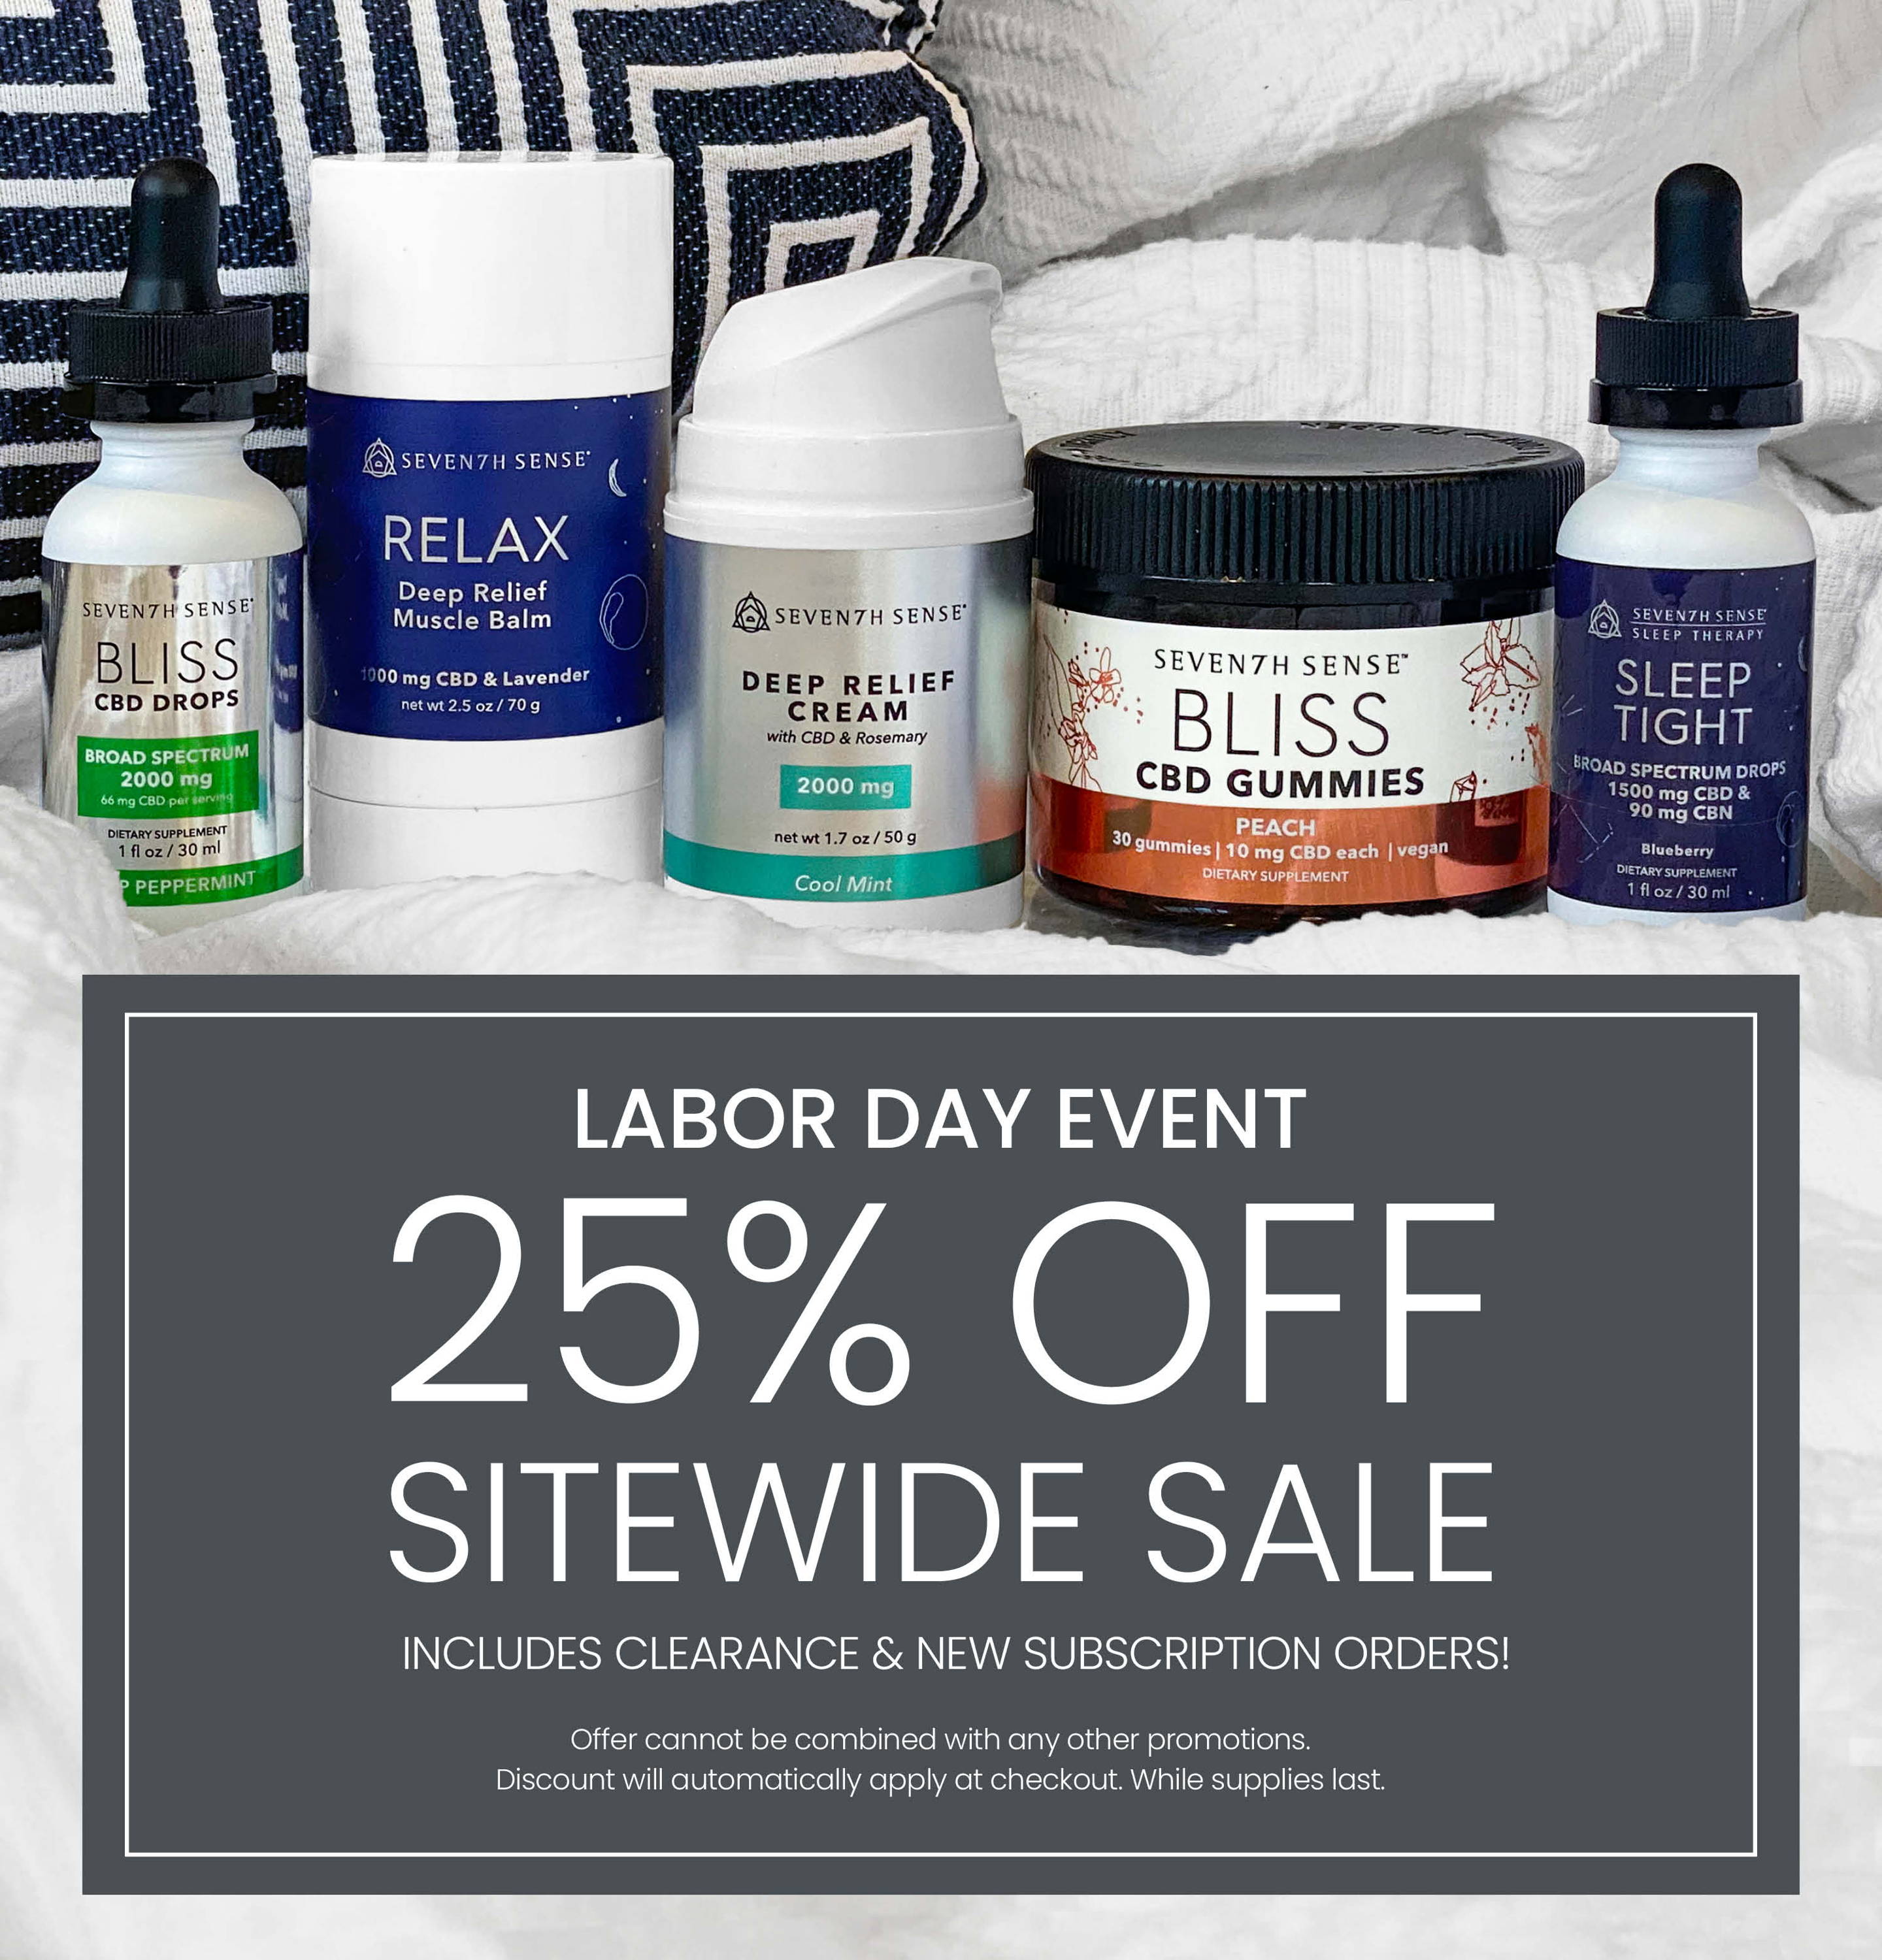 Labor Day Event. 25% Off Sitewide Sale. Includes clearance and new subscription orders! Offer cannot be combined with any other promotions. Discount will automatically apply at checkout. While supplies last.